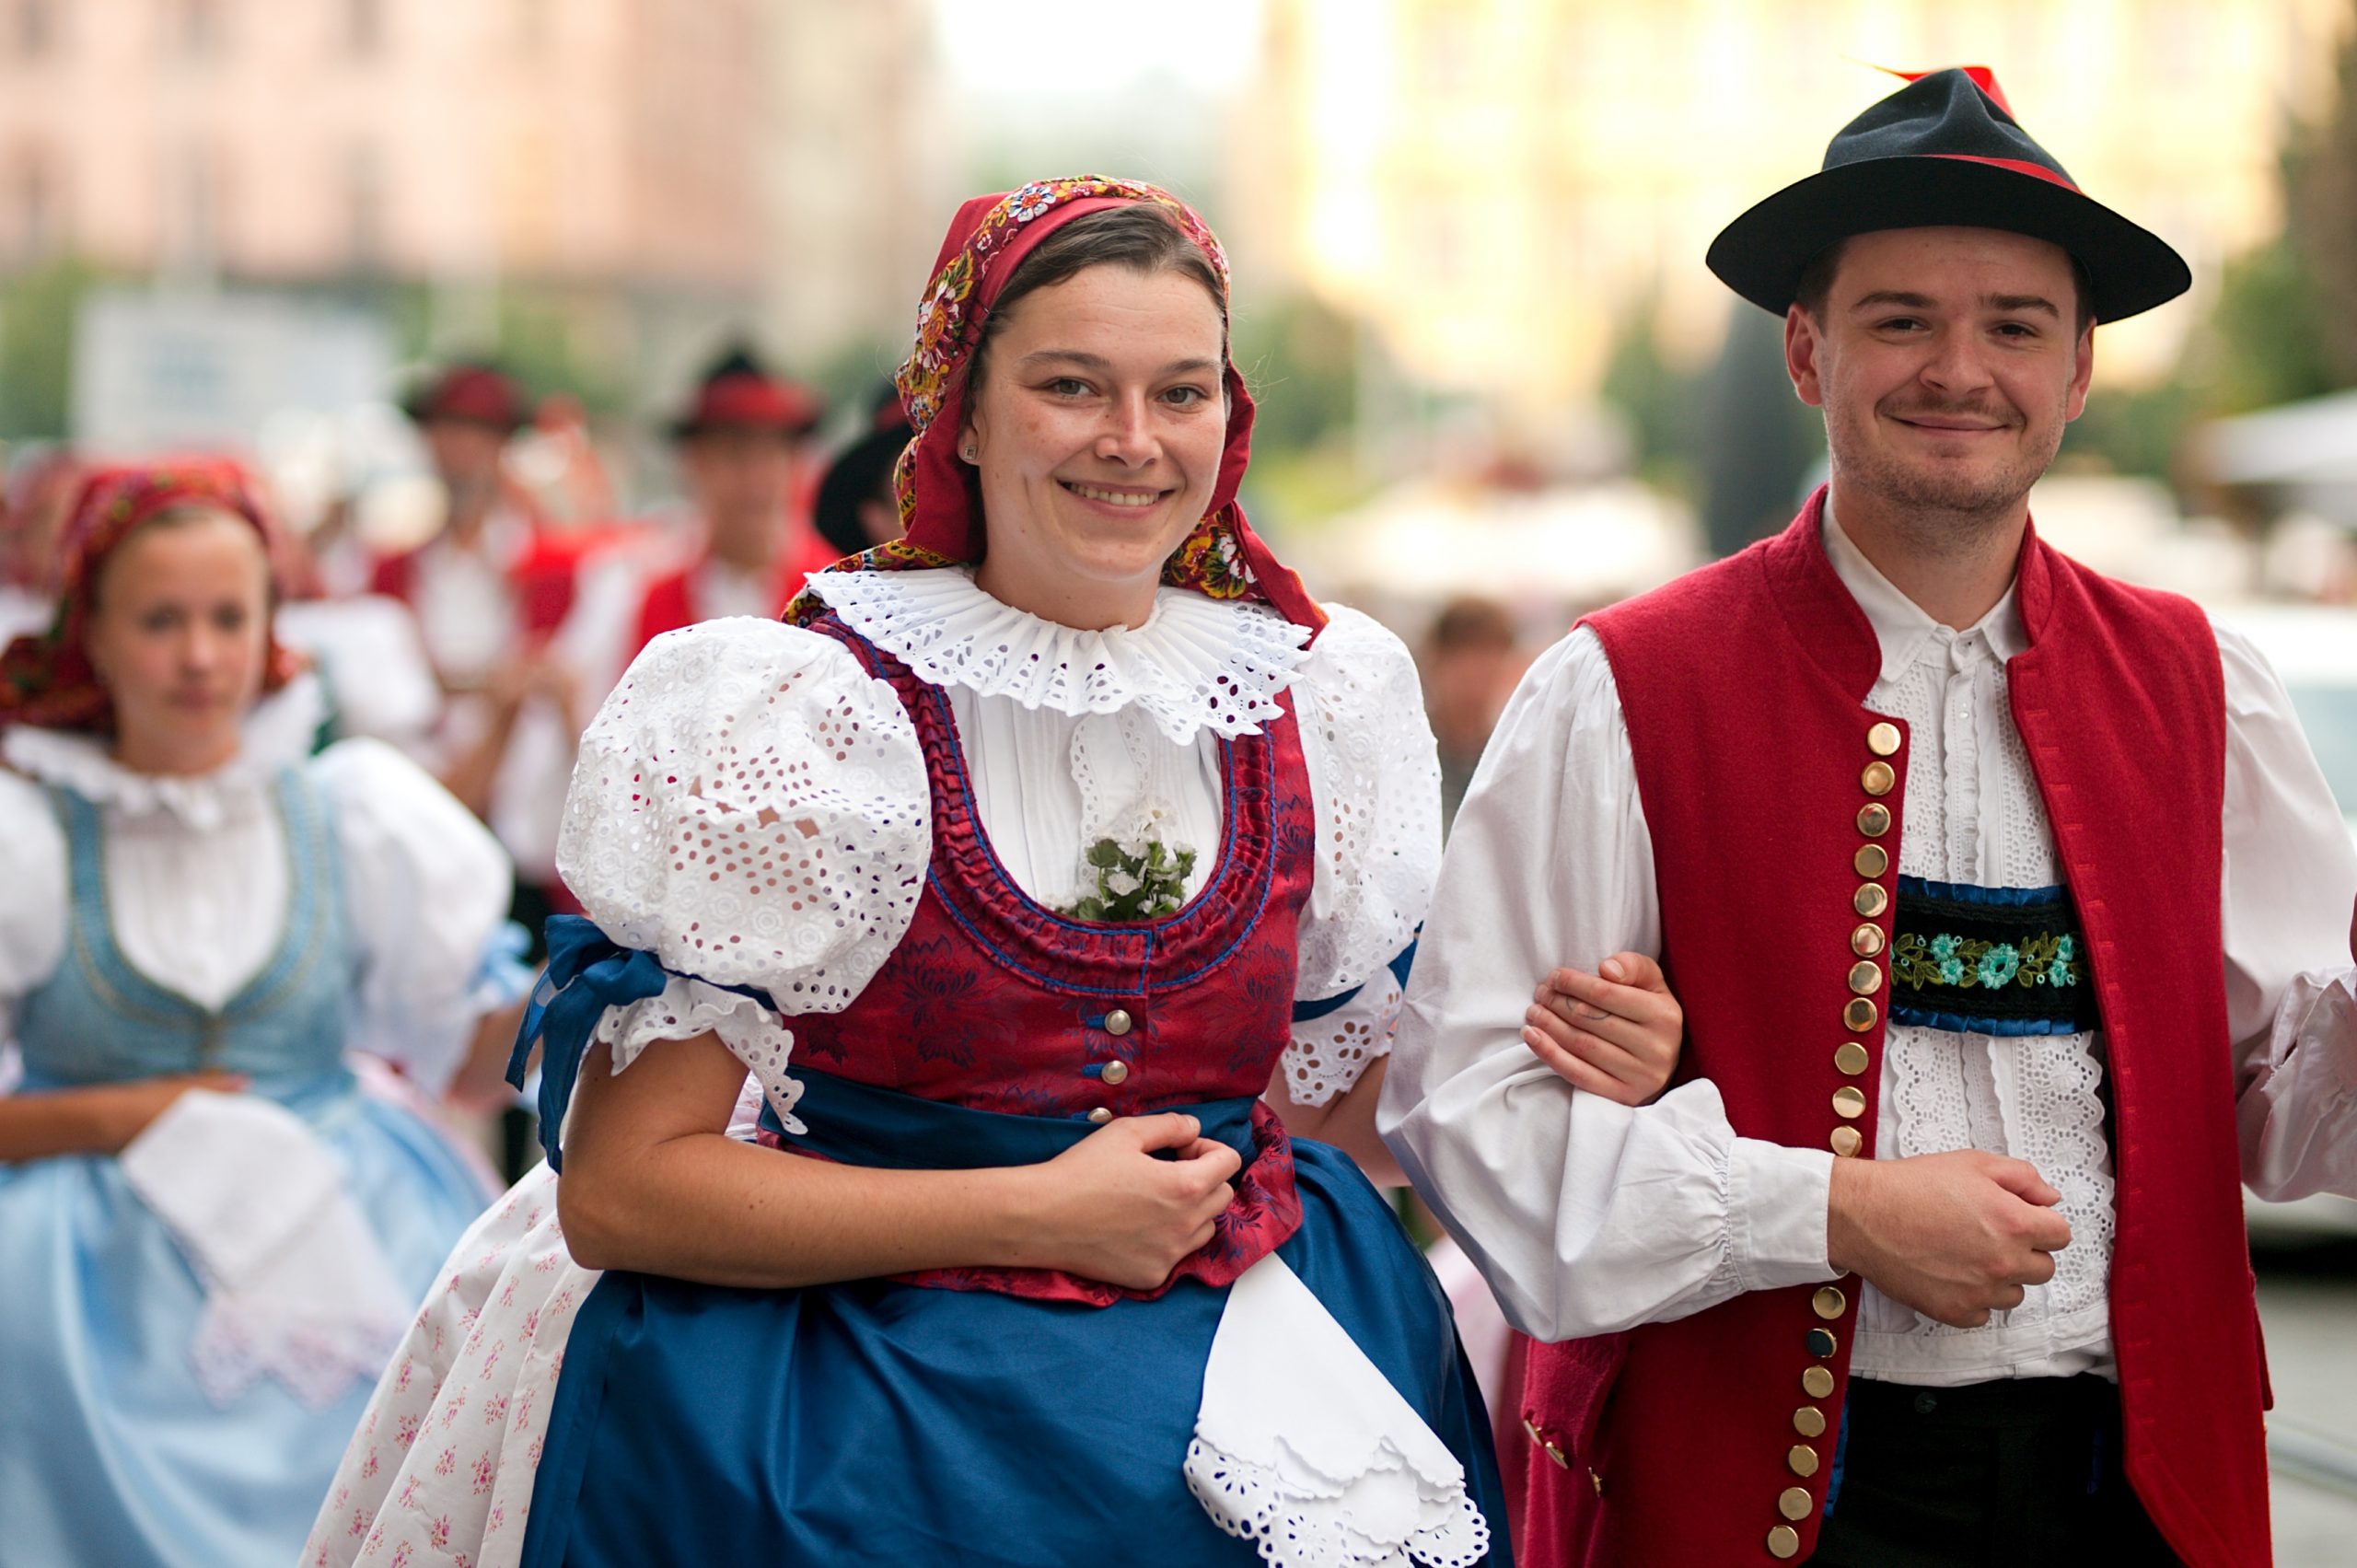 An association for the promotion of Czech culture in Brno – Brno Daily